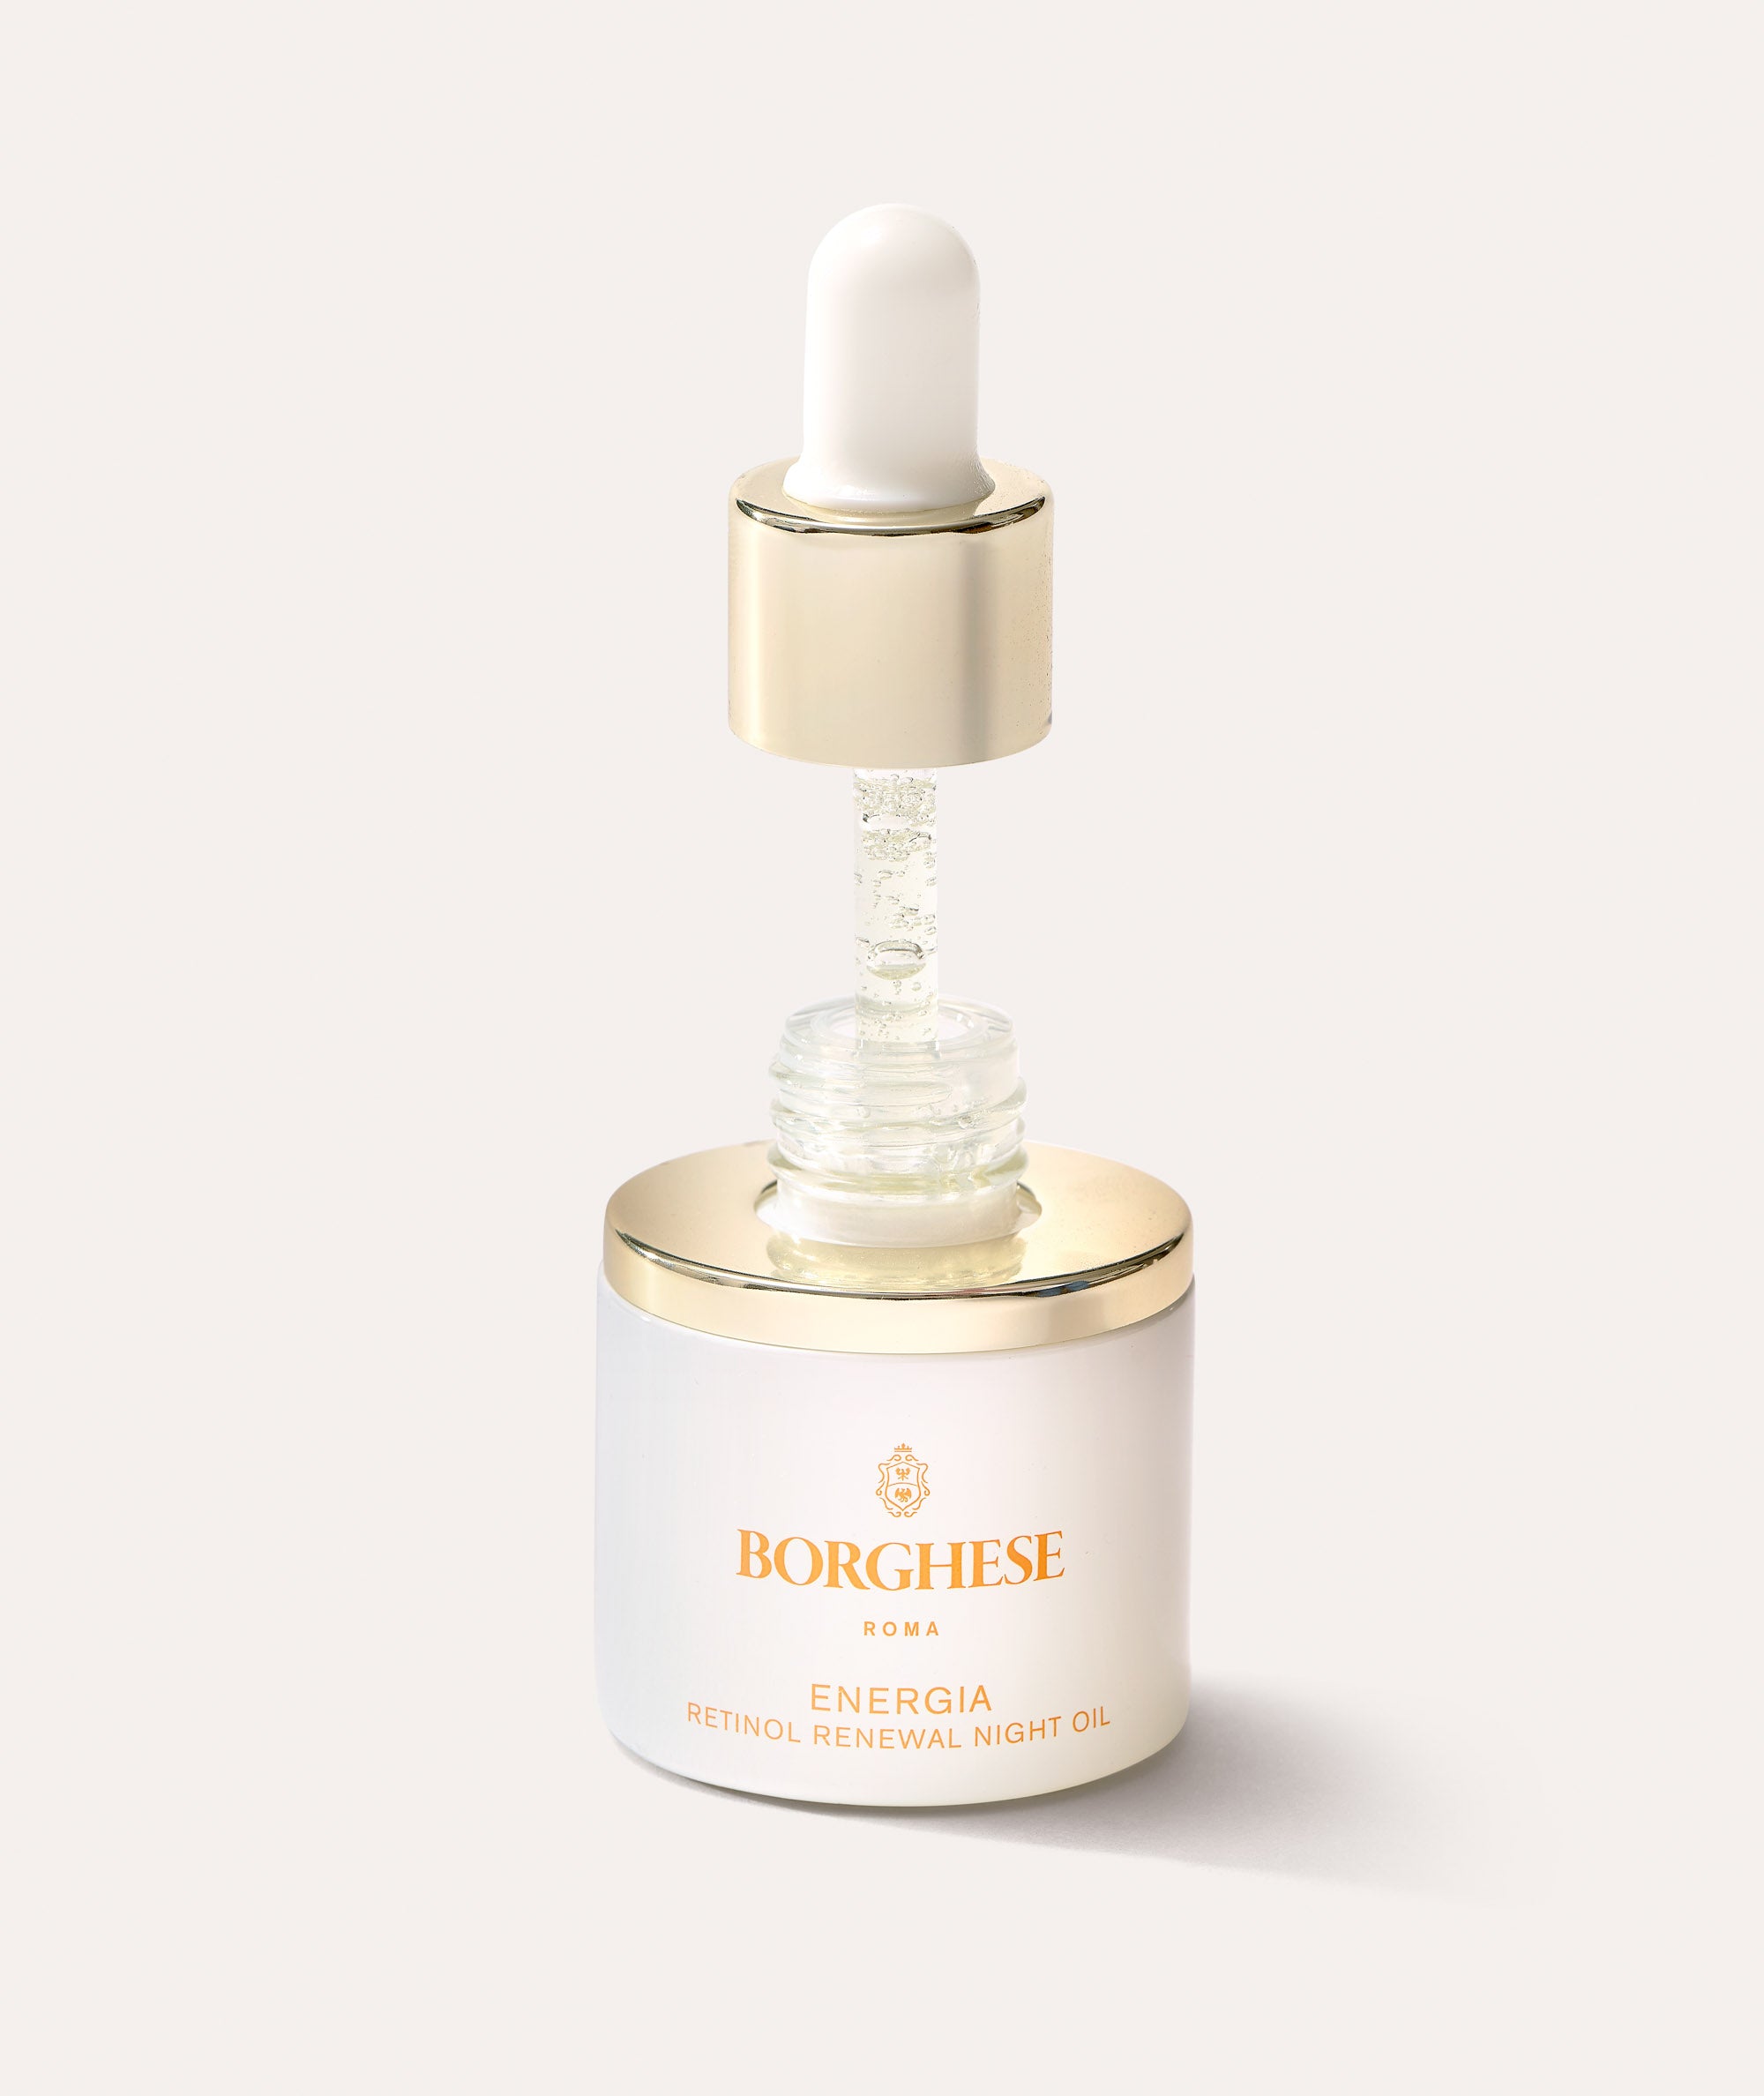 This is a picture of Borghese ENERGIA Retinol Renewal Night Oil dispenser in the bottle